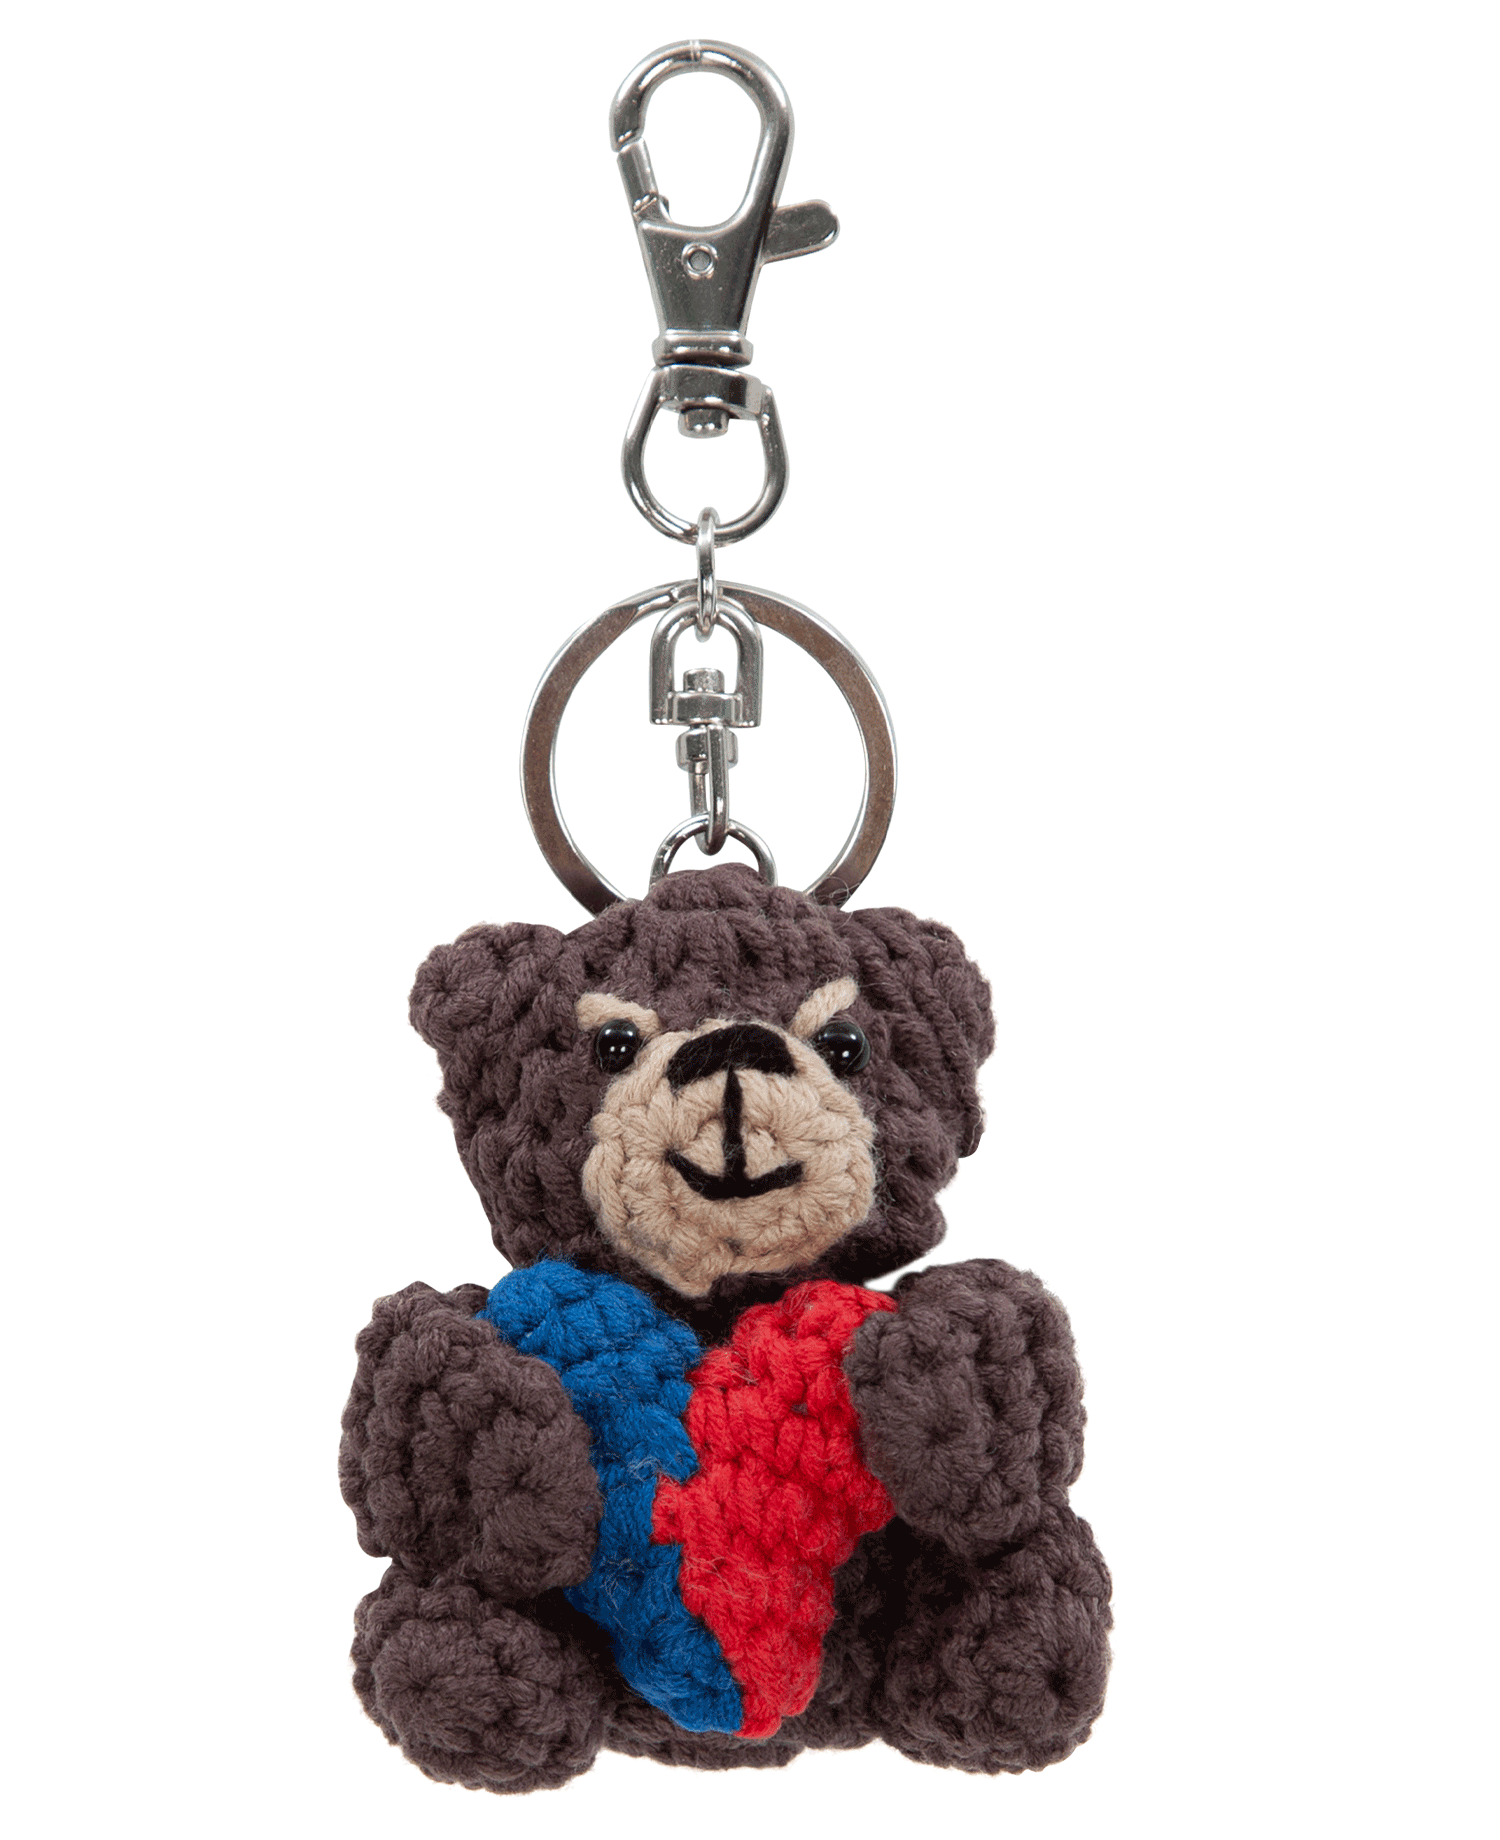 815 LIBERATION DAY KEY CHAIN_BROWN